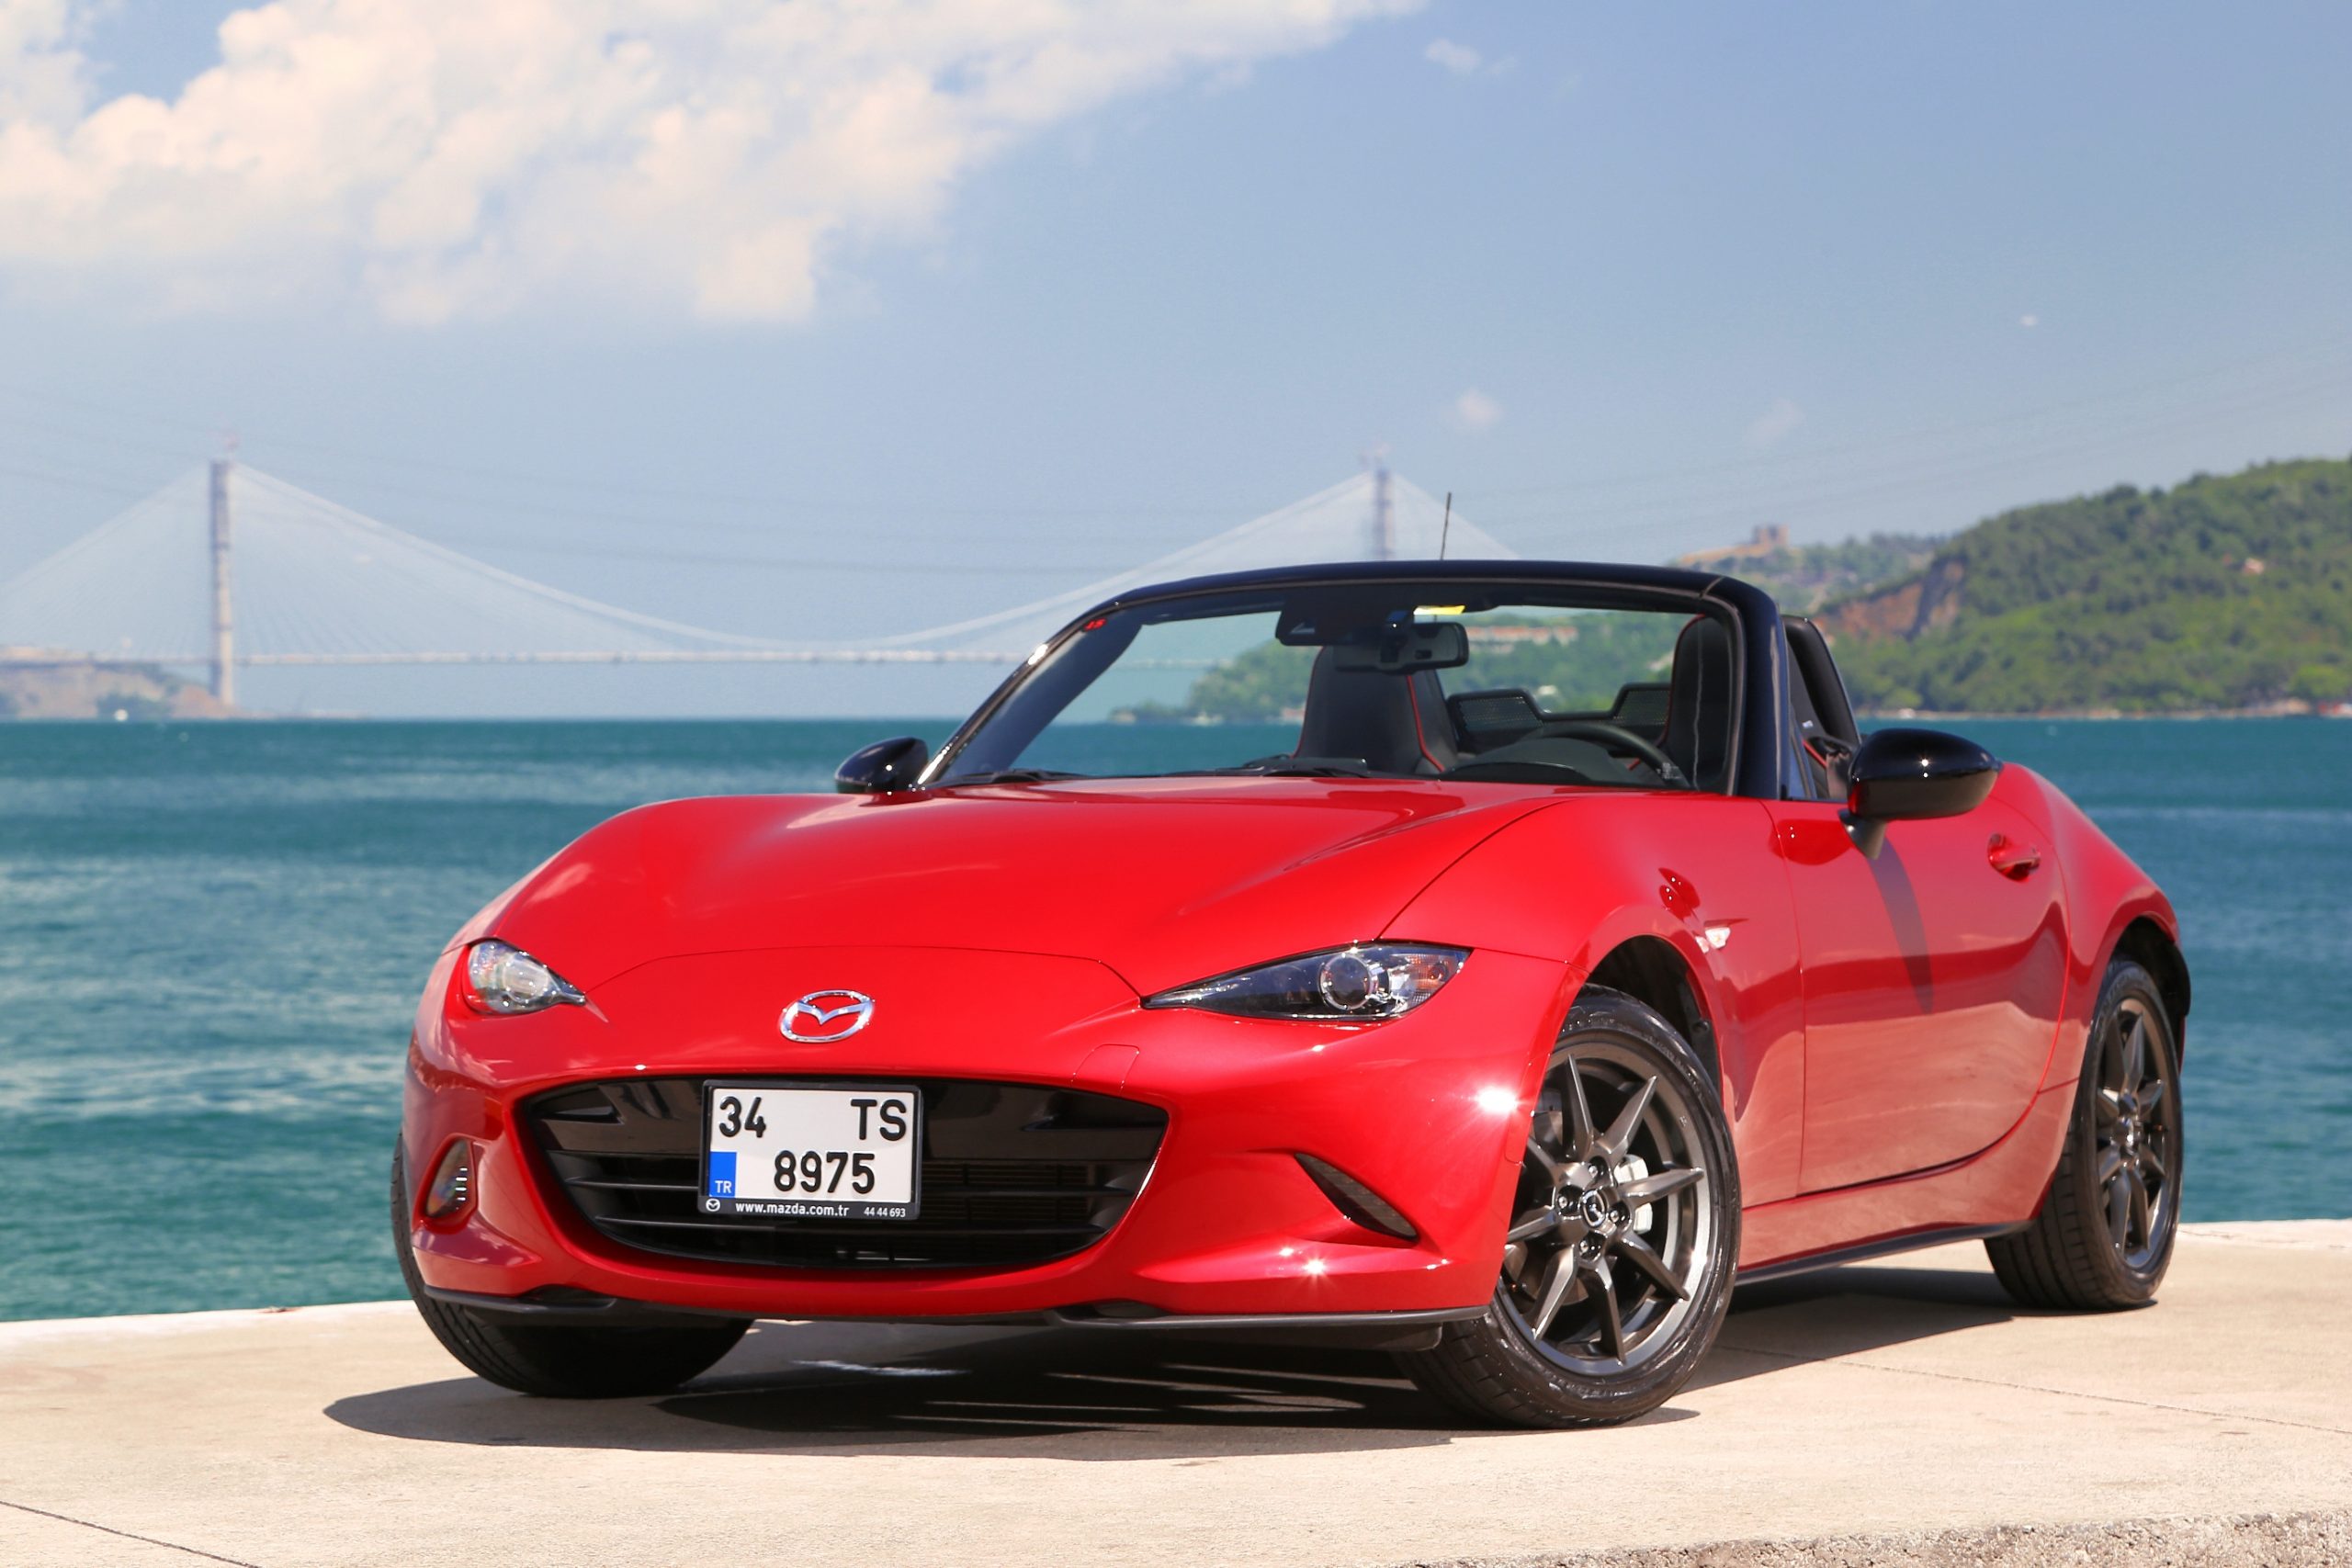 Why The Mazda MX5 2016 Is One Of The World’s Most Popular Sports Cars